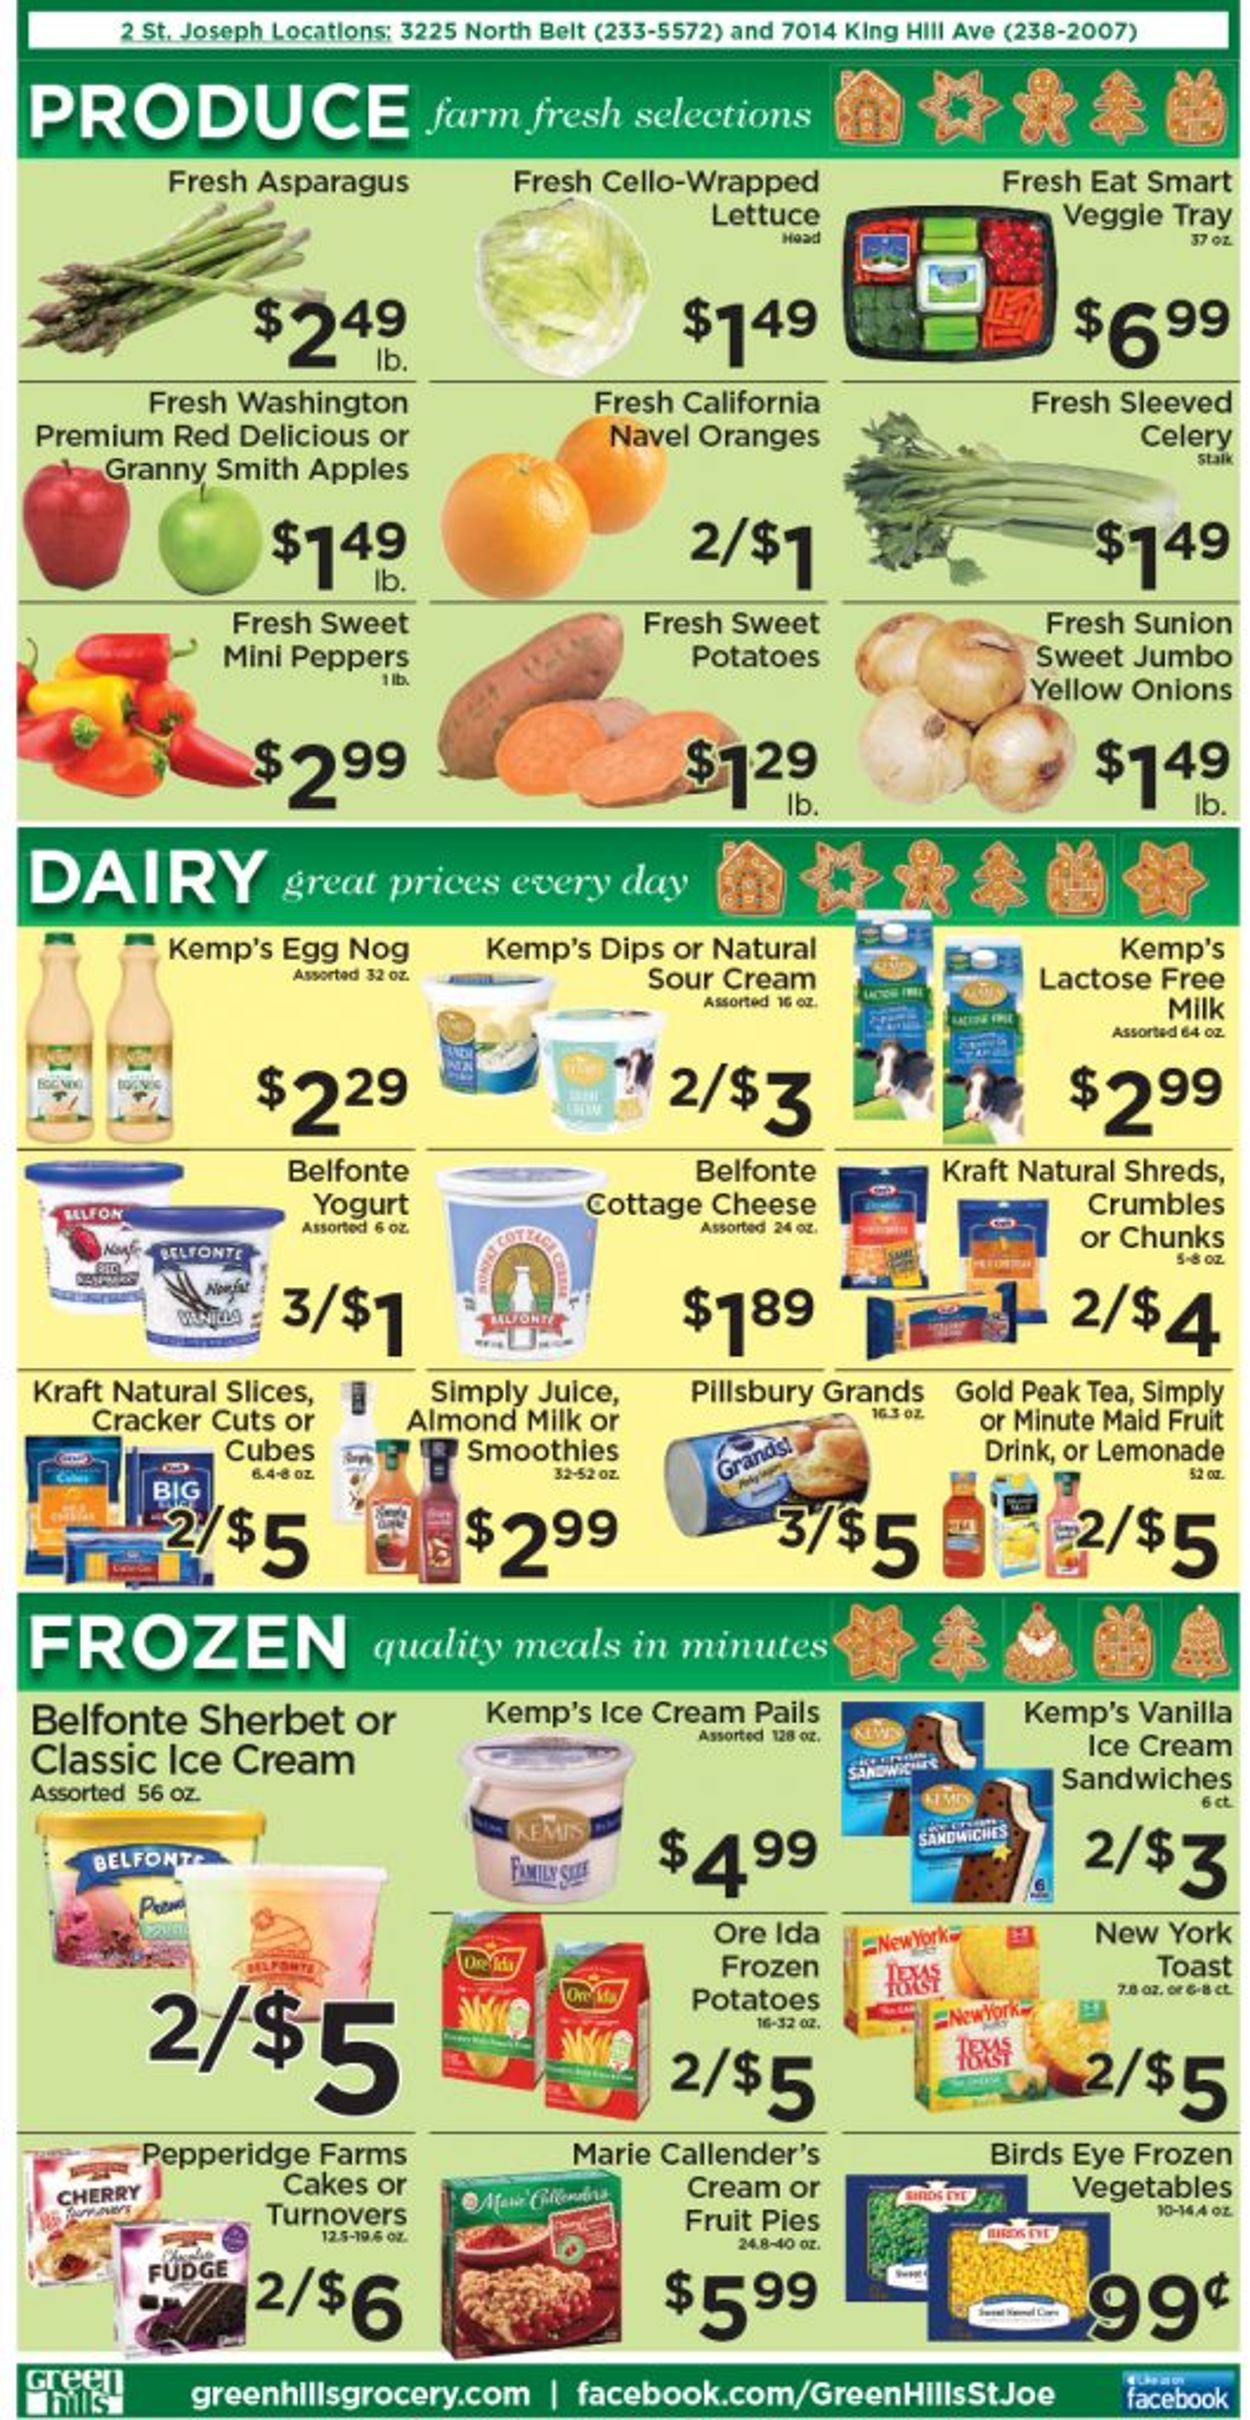 Green Hills Grocery HOLIDAY 2021 Weekly Ad Circular - valid 12/15-12/21/2021 (Page 2)